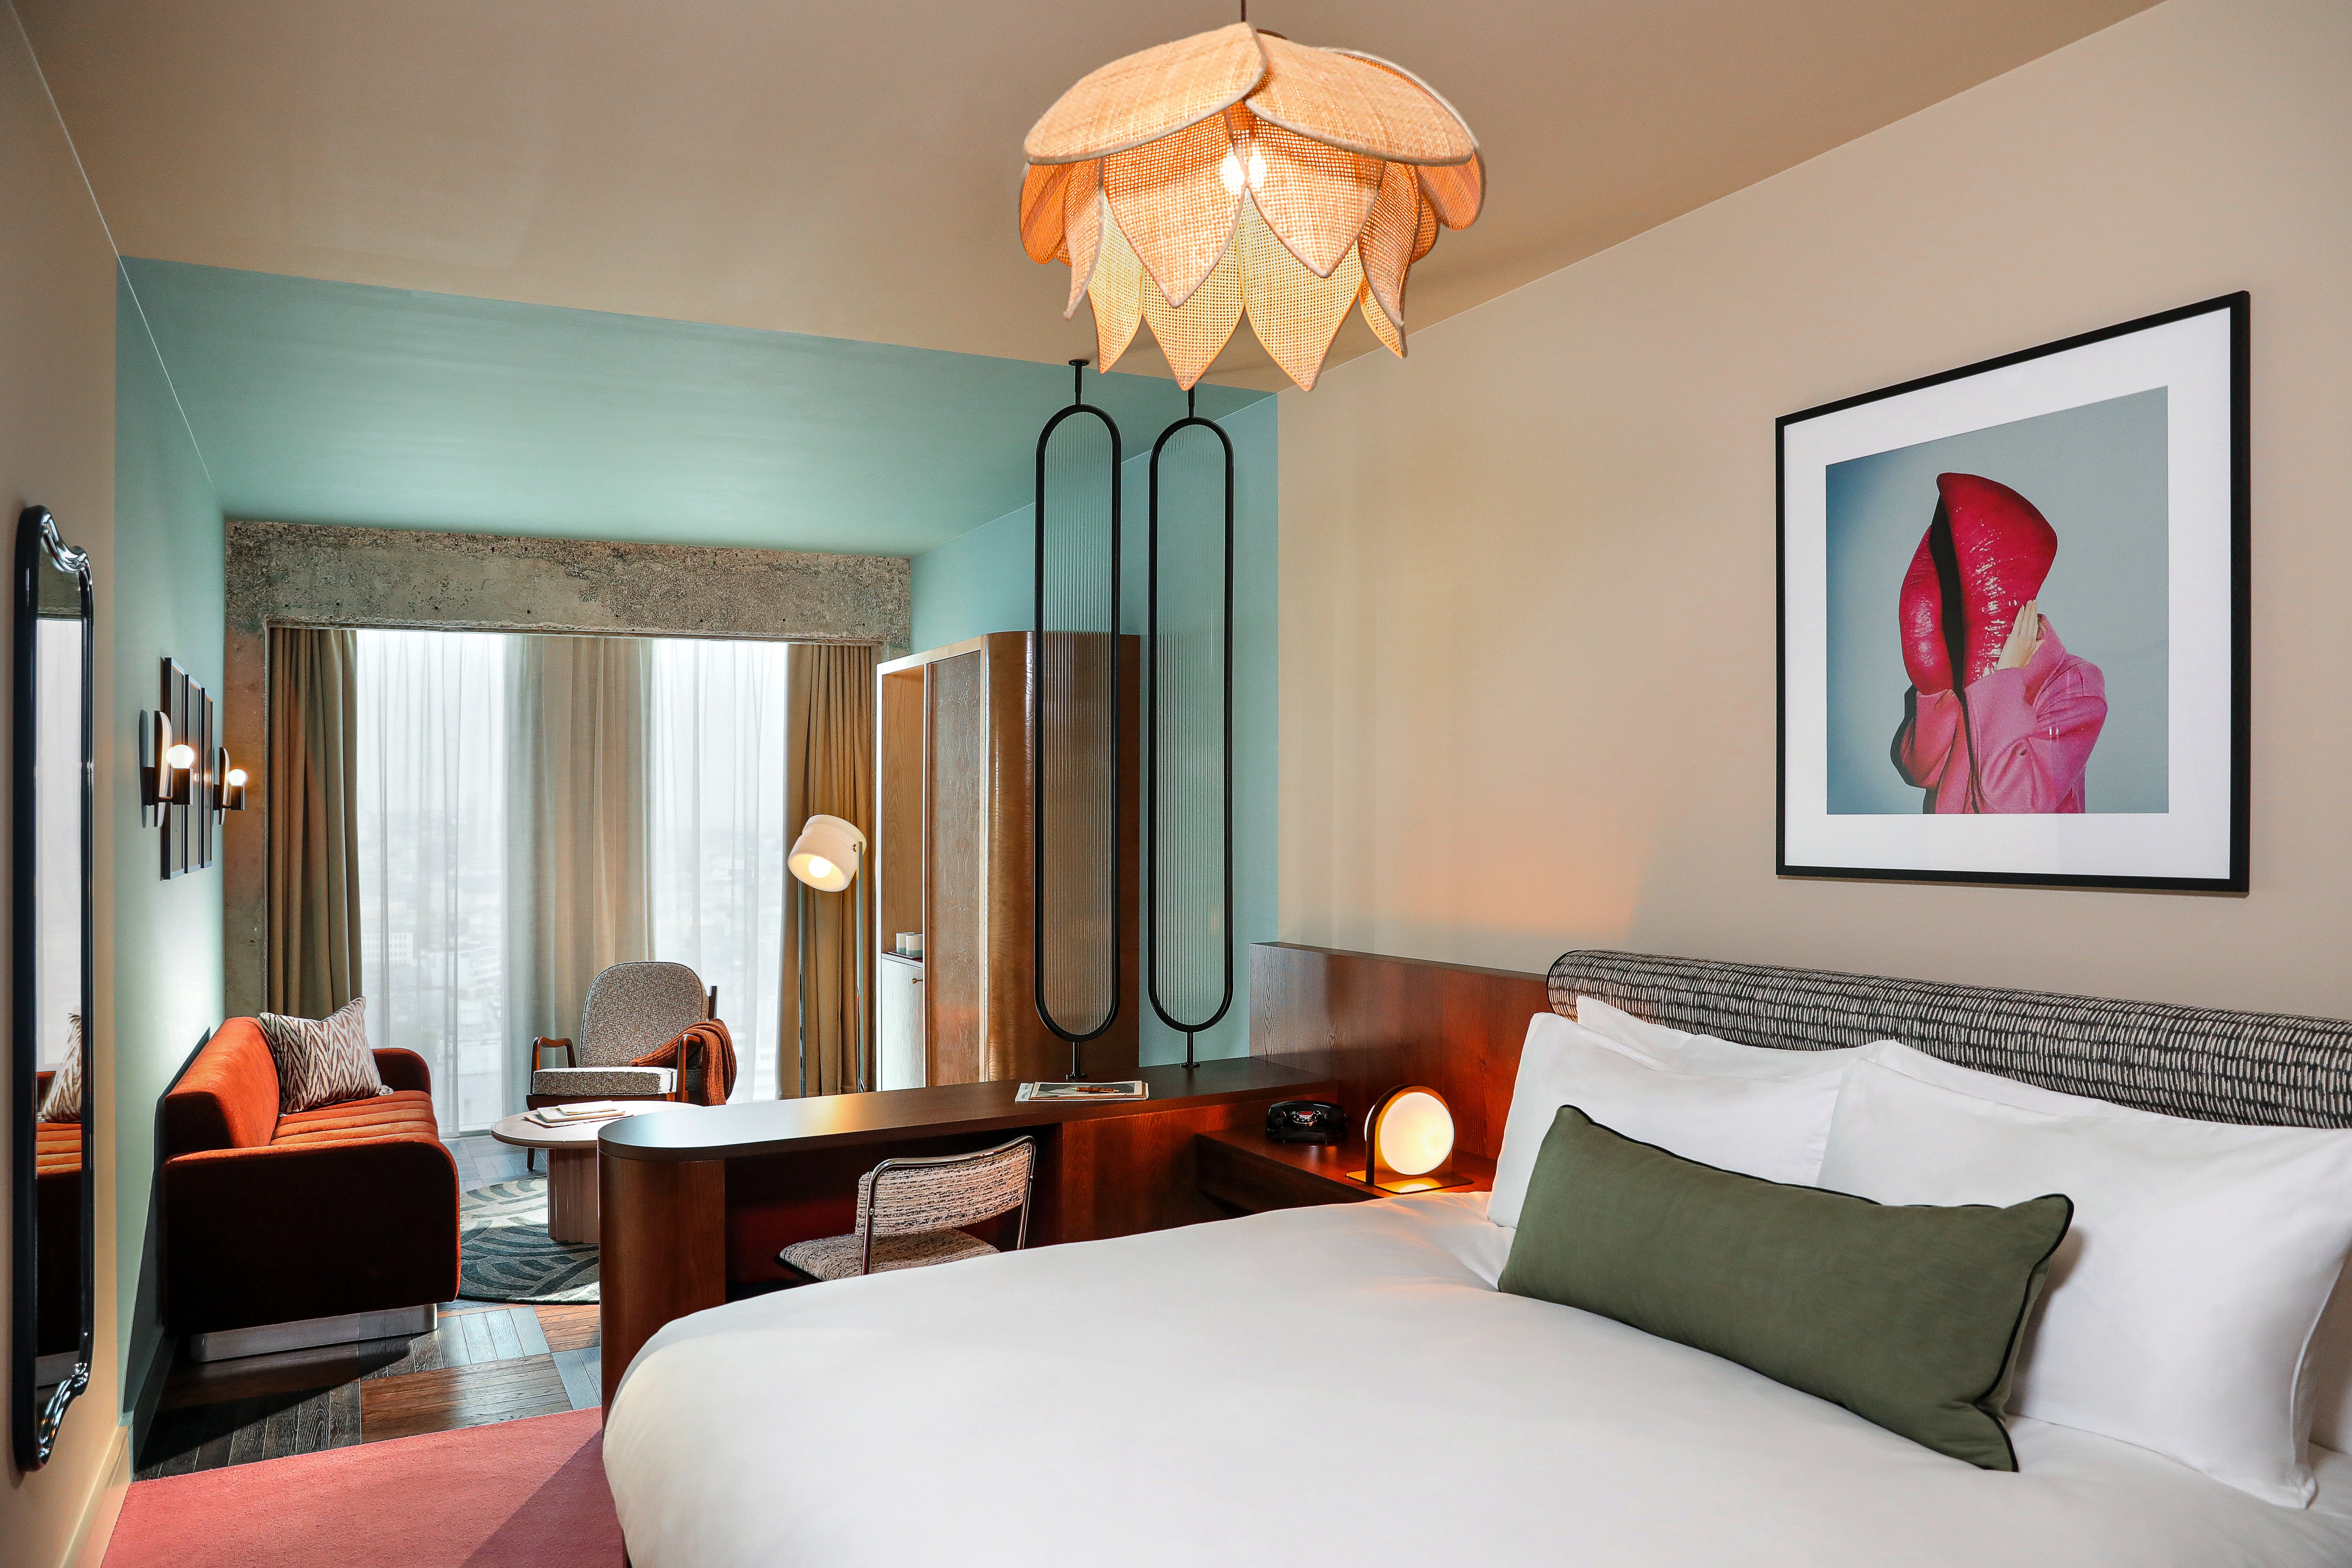 The hotel has a 1970s aesthetic – think modular furniture, lily-shaped lighting and velvet sofas